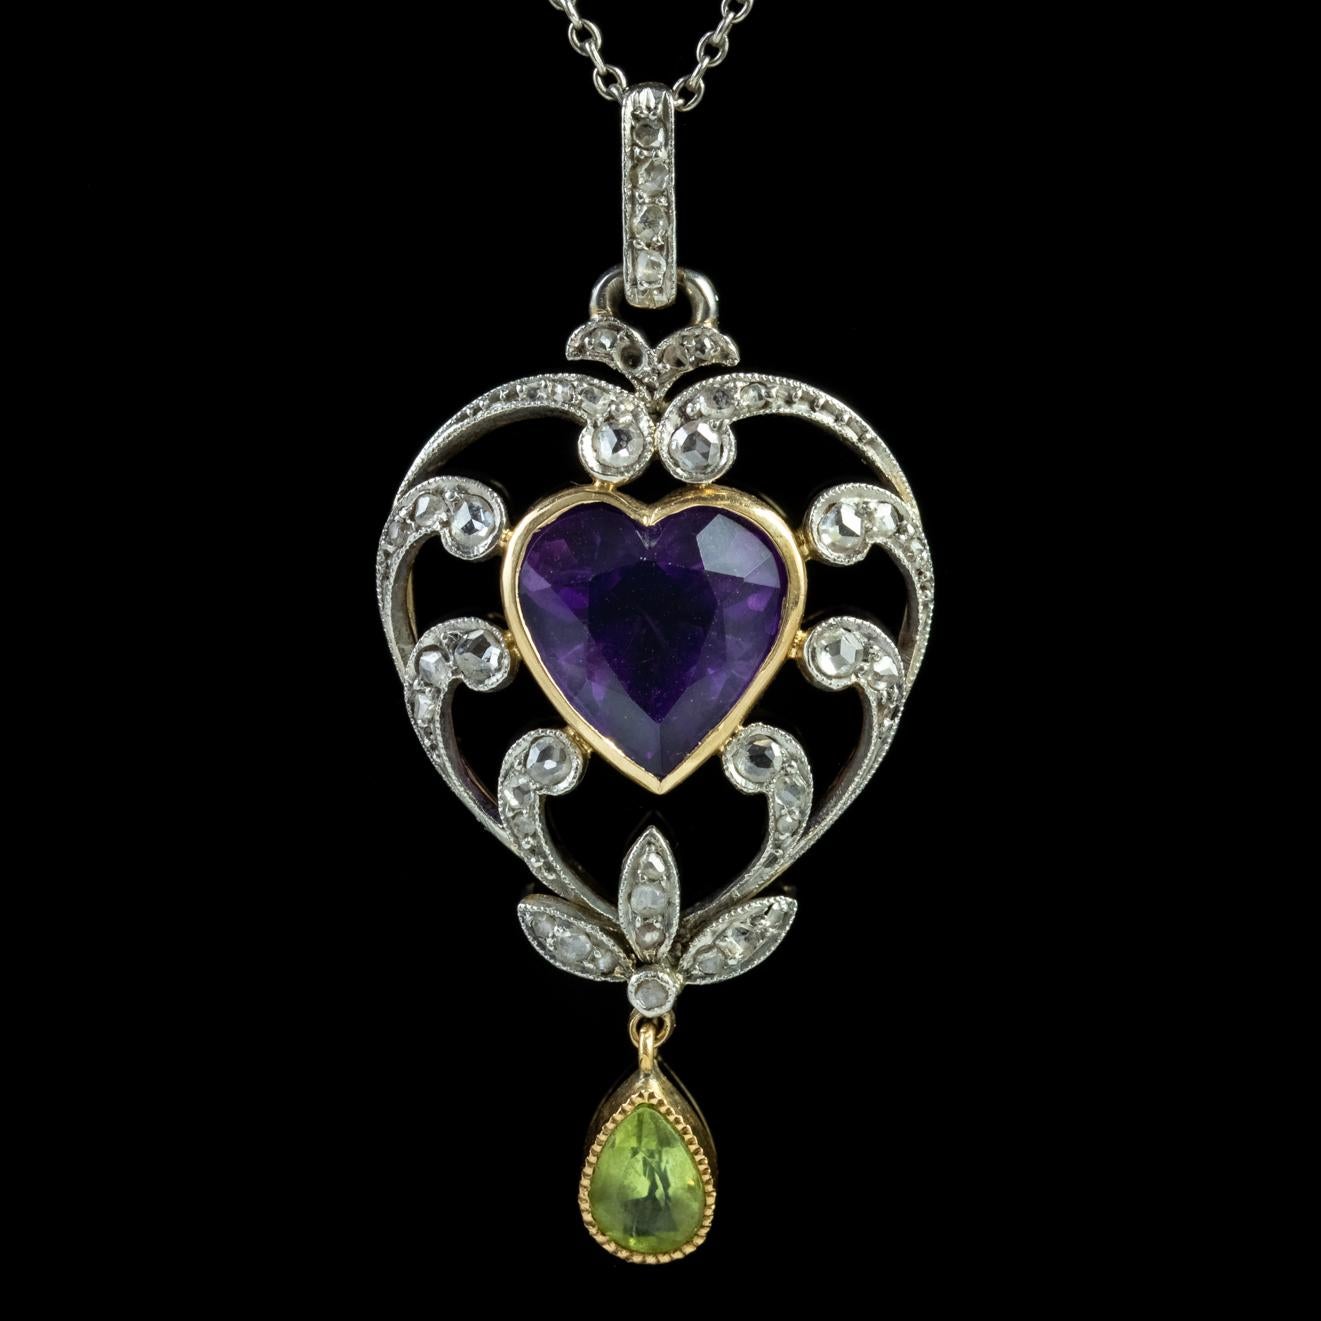 A delightful antique Edwardian Suffragette necklace featuring a fabulous pendant decorated with sparkling Diamonds, a teardrop Peridot dropper and a lovely Amethyst heart in the centre which is approx. 3ct.

Suffragettes liked to be depicted as